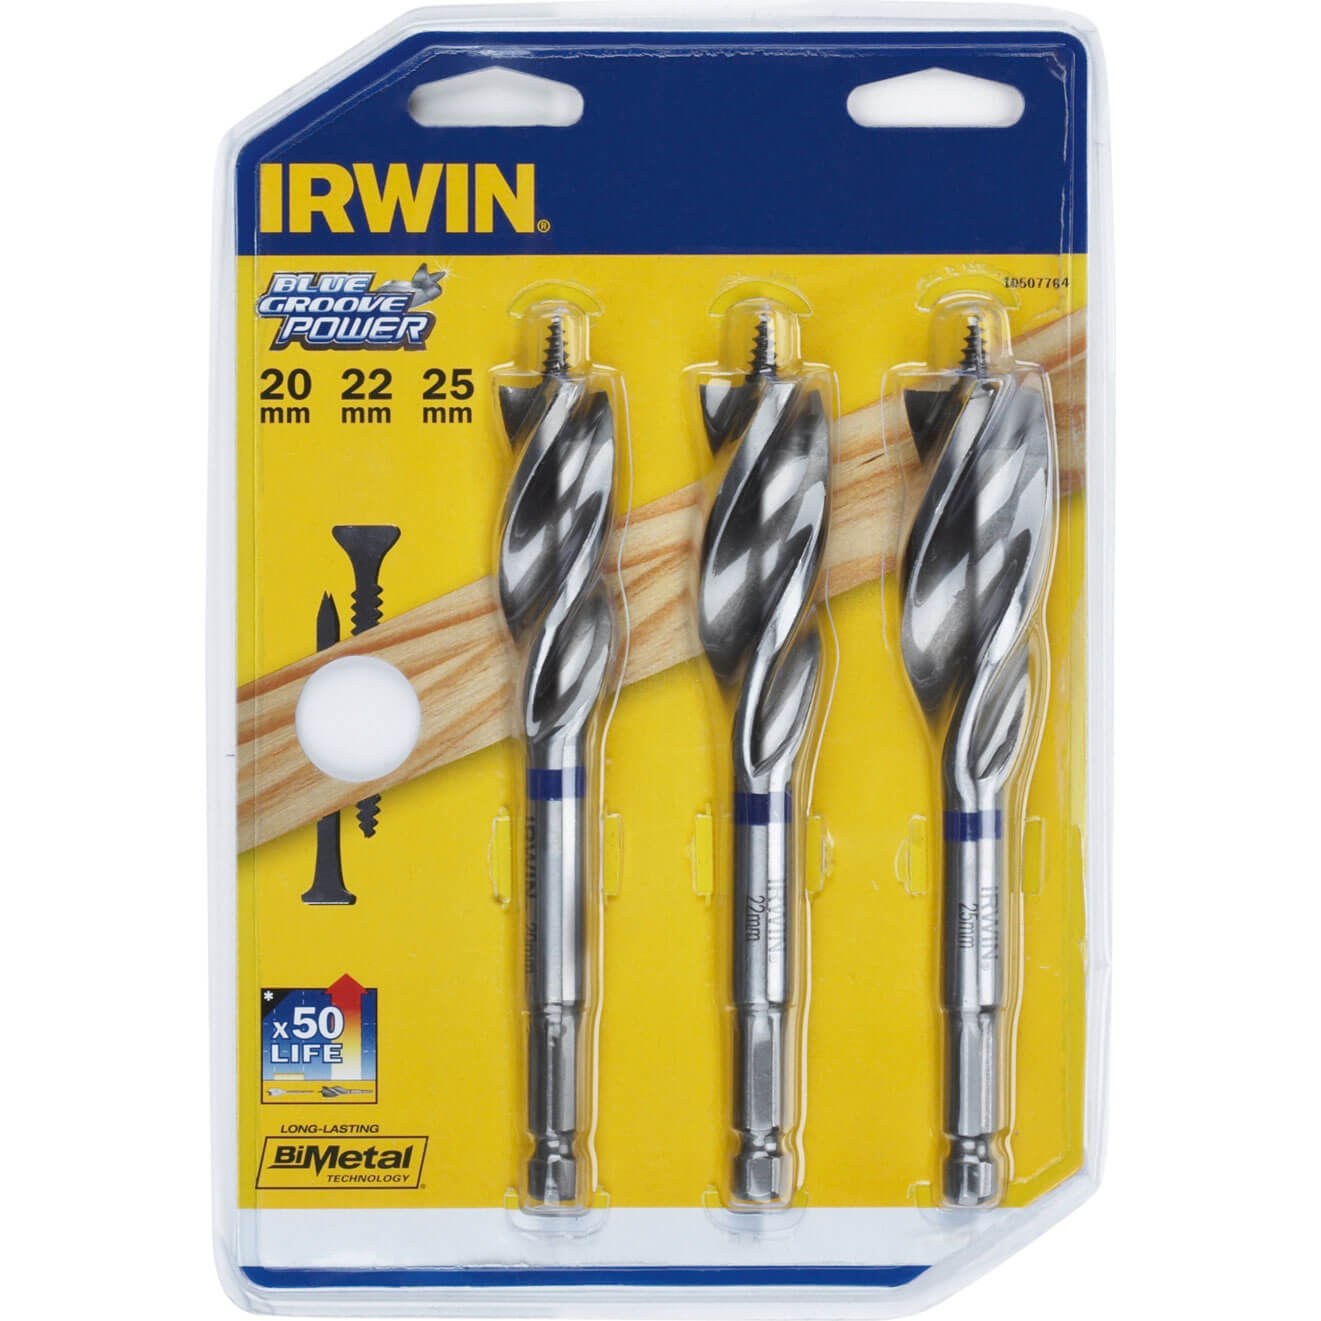 Image of Irwin 3 Piece Blue Groove Nail Biteing Power Wood Drill Bit Set